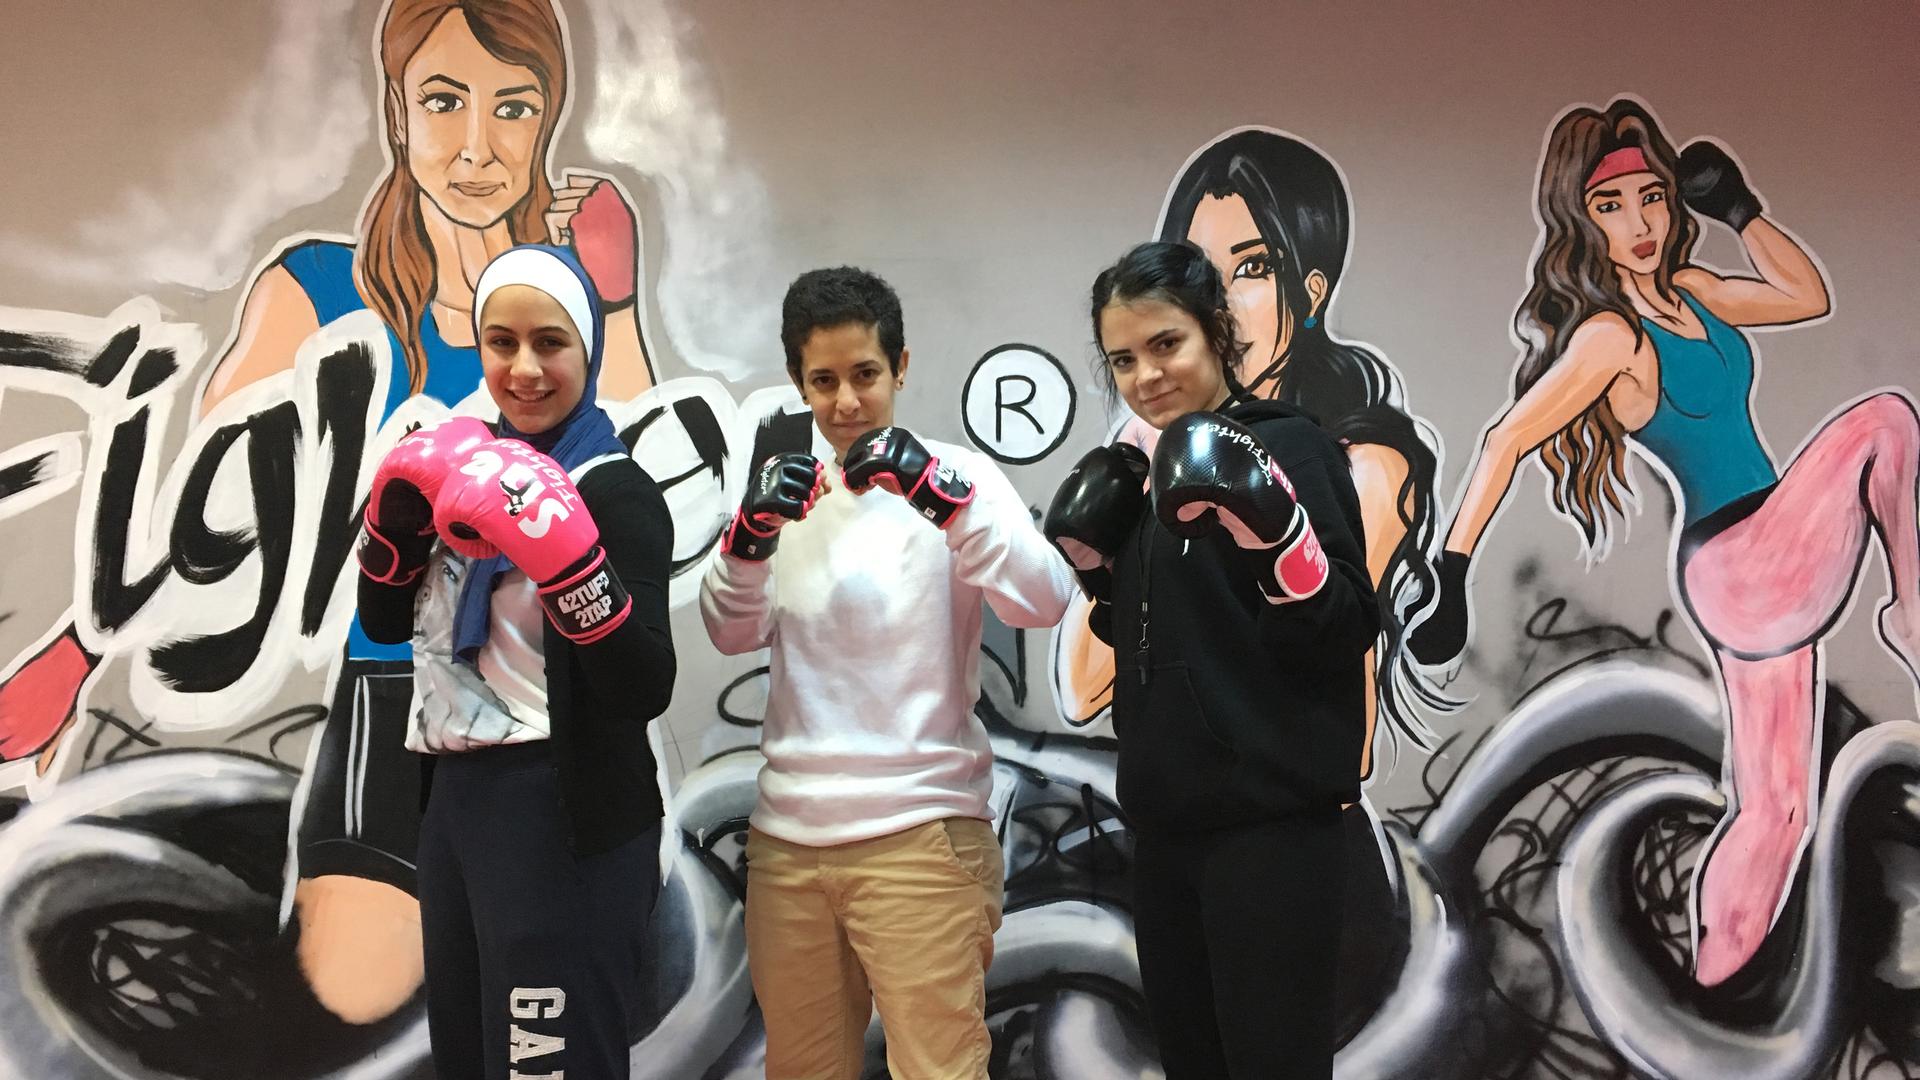 Lina Khalifeh (center), Batoul Jaikat (right) and one of the students at the SheFighter studio in Amman, Jordan.